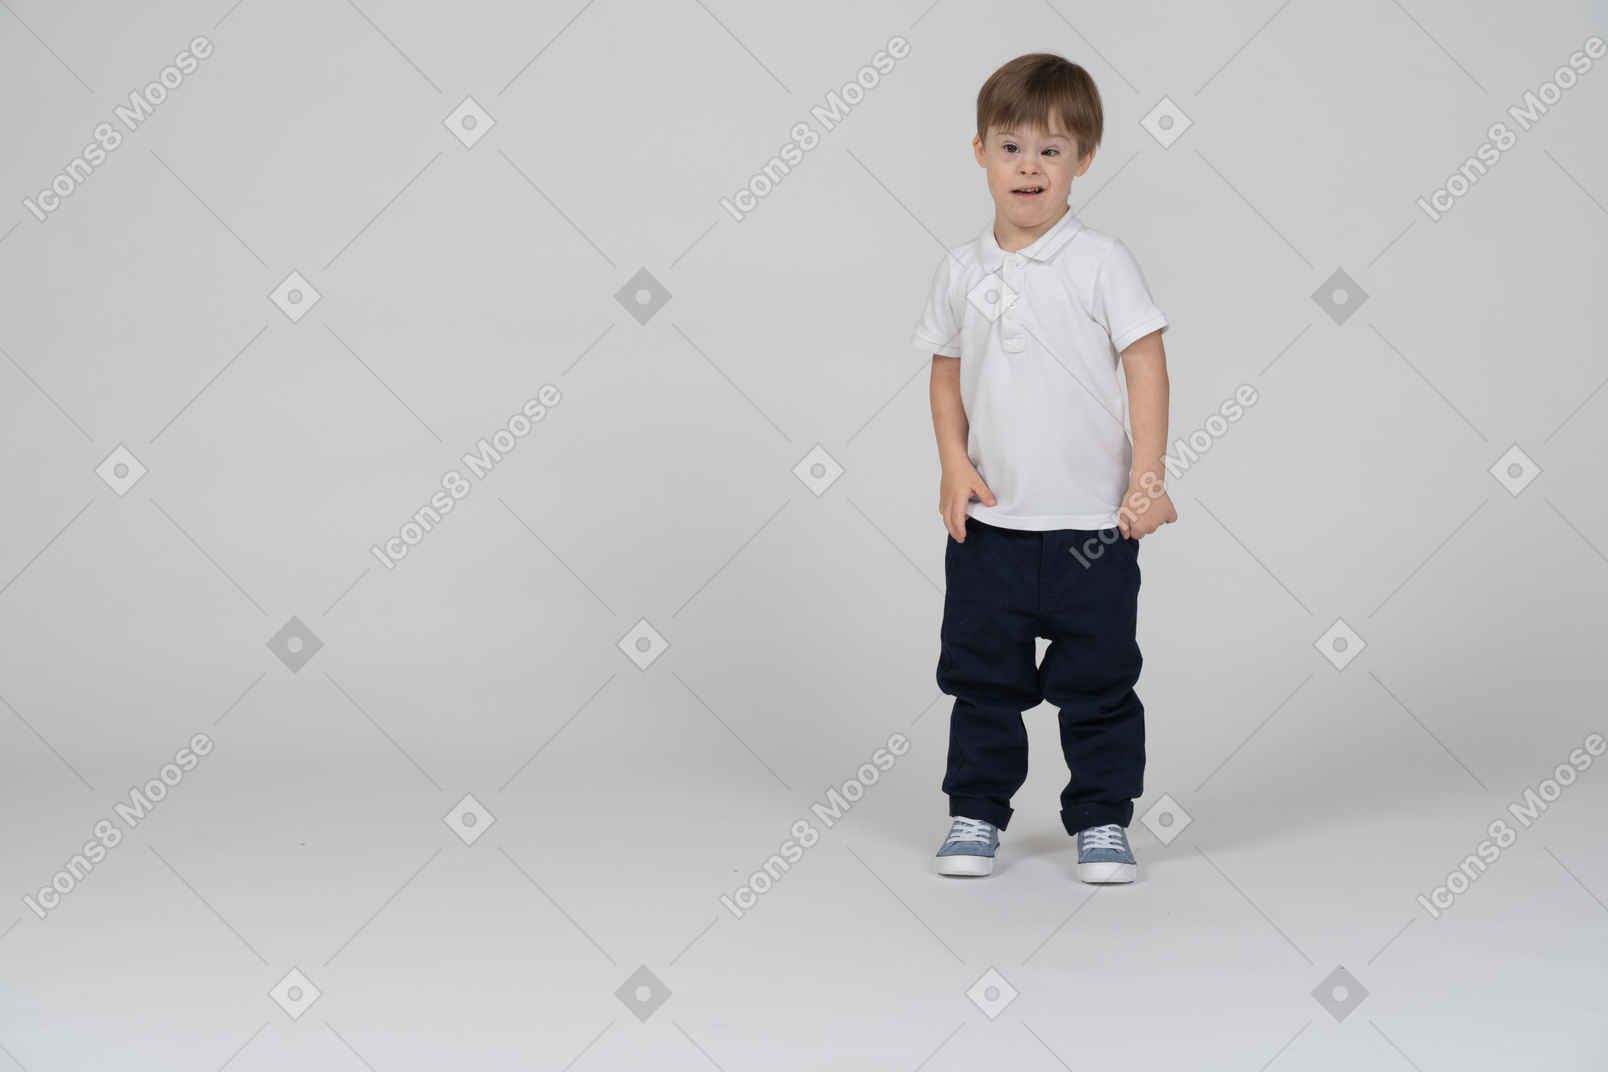 Front view of a boy standing and looking puzzled